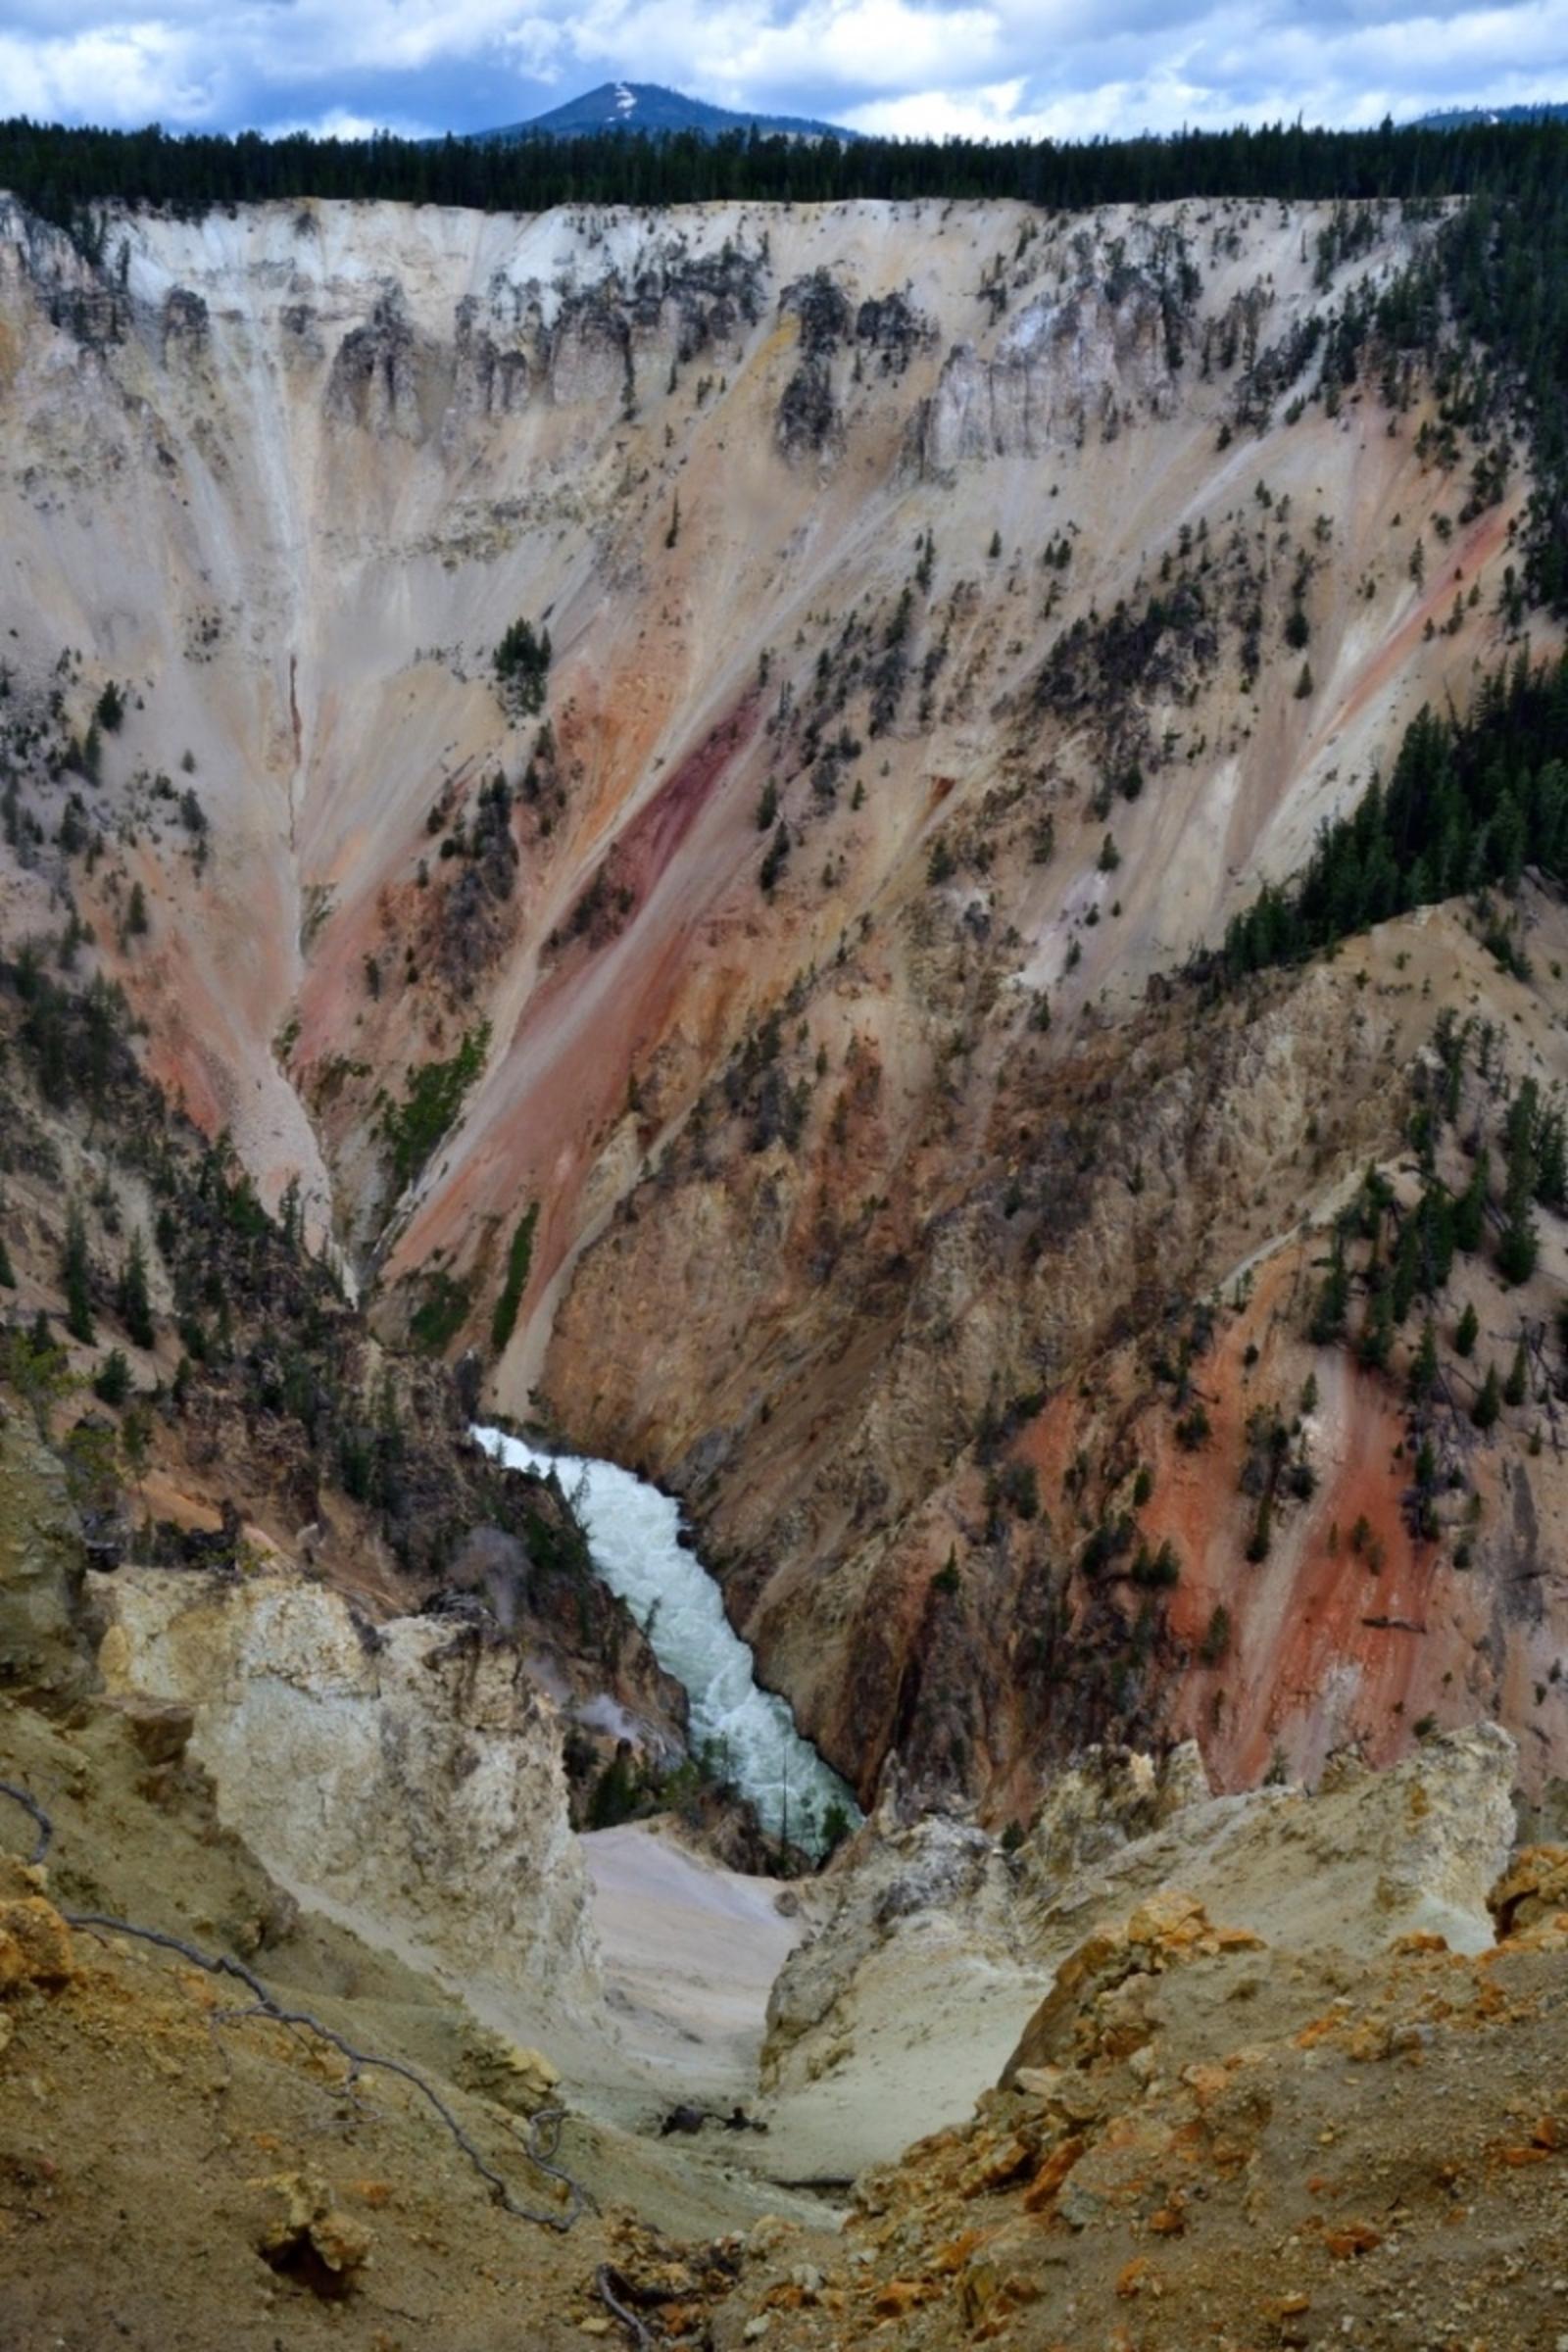 Fuller says that despite dwelling near the edge of the Grand Canyon of the Yellowstone, given constantly shifting light and shadow, he's never seen the same scene twice.